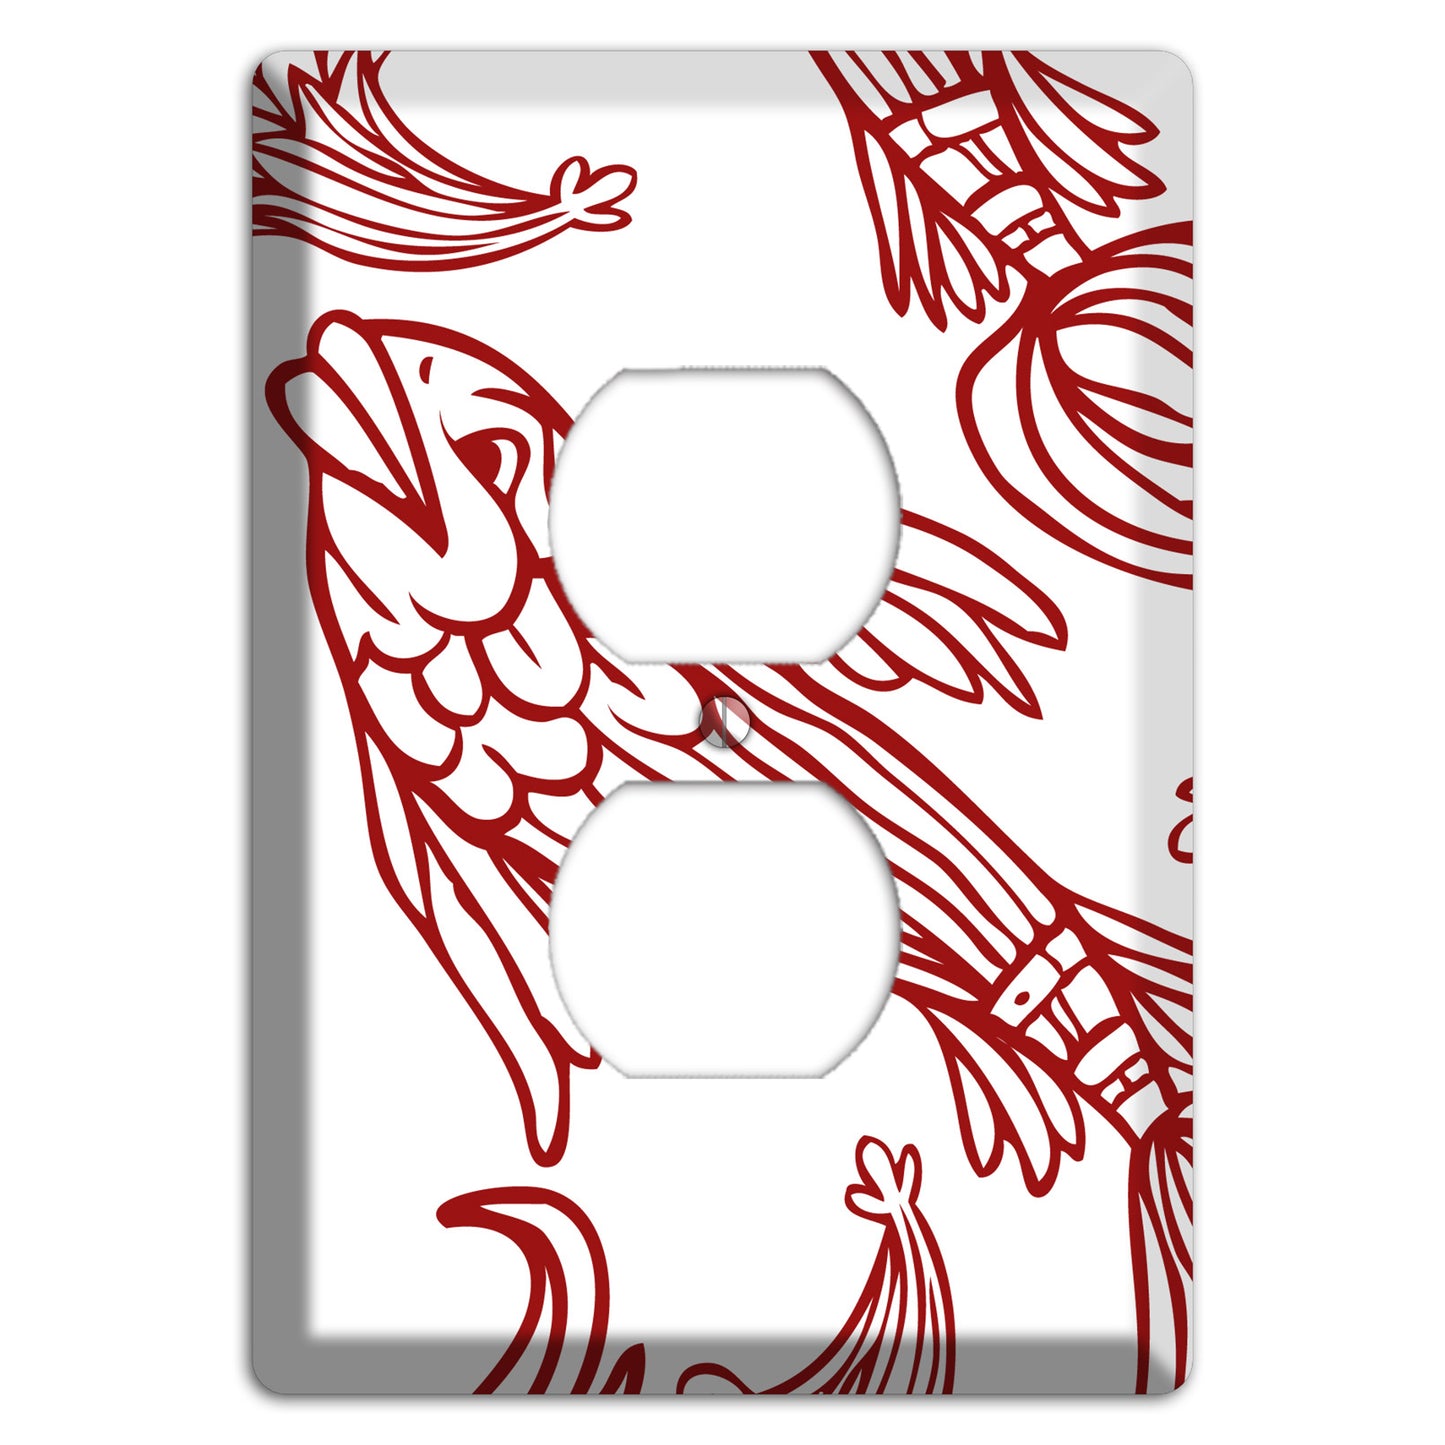 Red and White Koi Duplex Outlet Wallplate